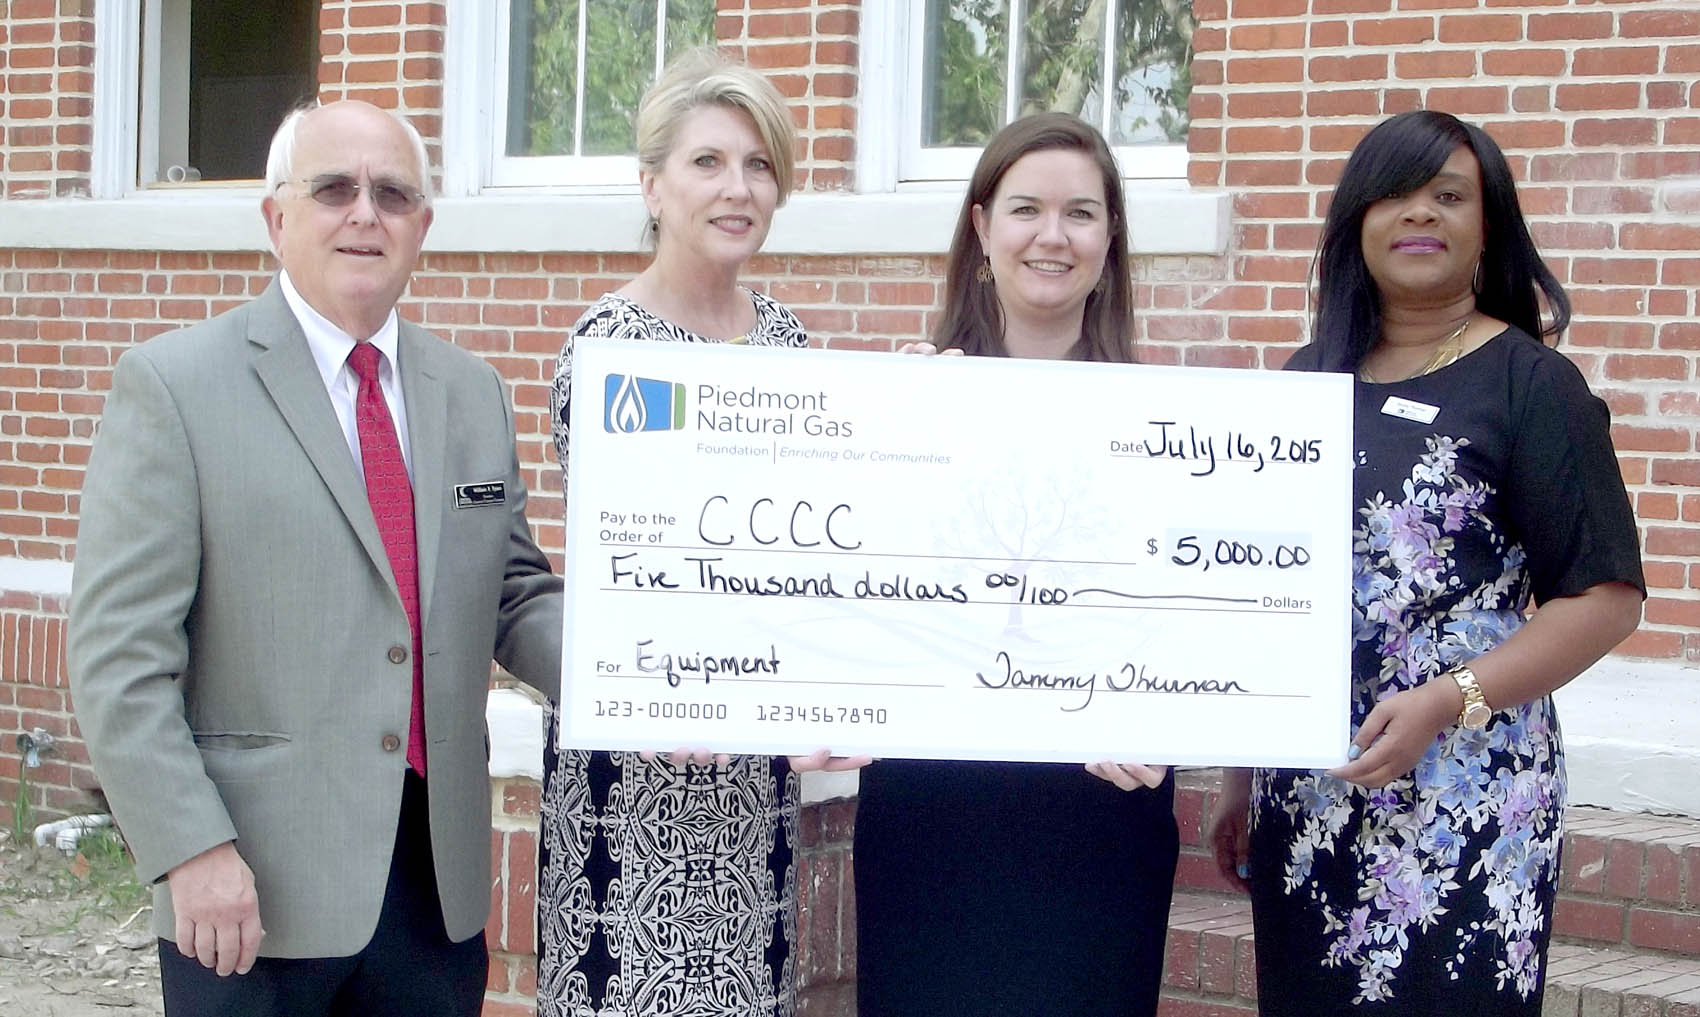 Piedmont Natural Gas Foundation donates to CCCC